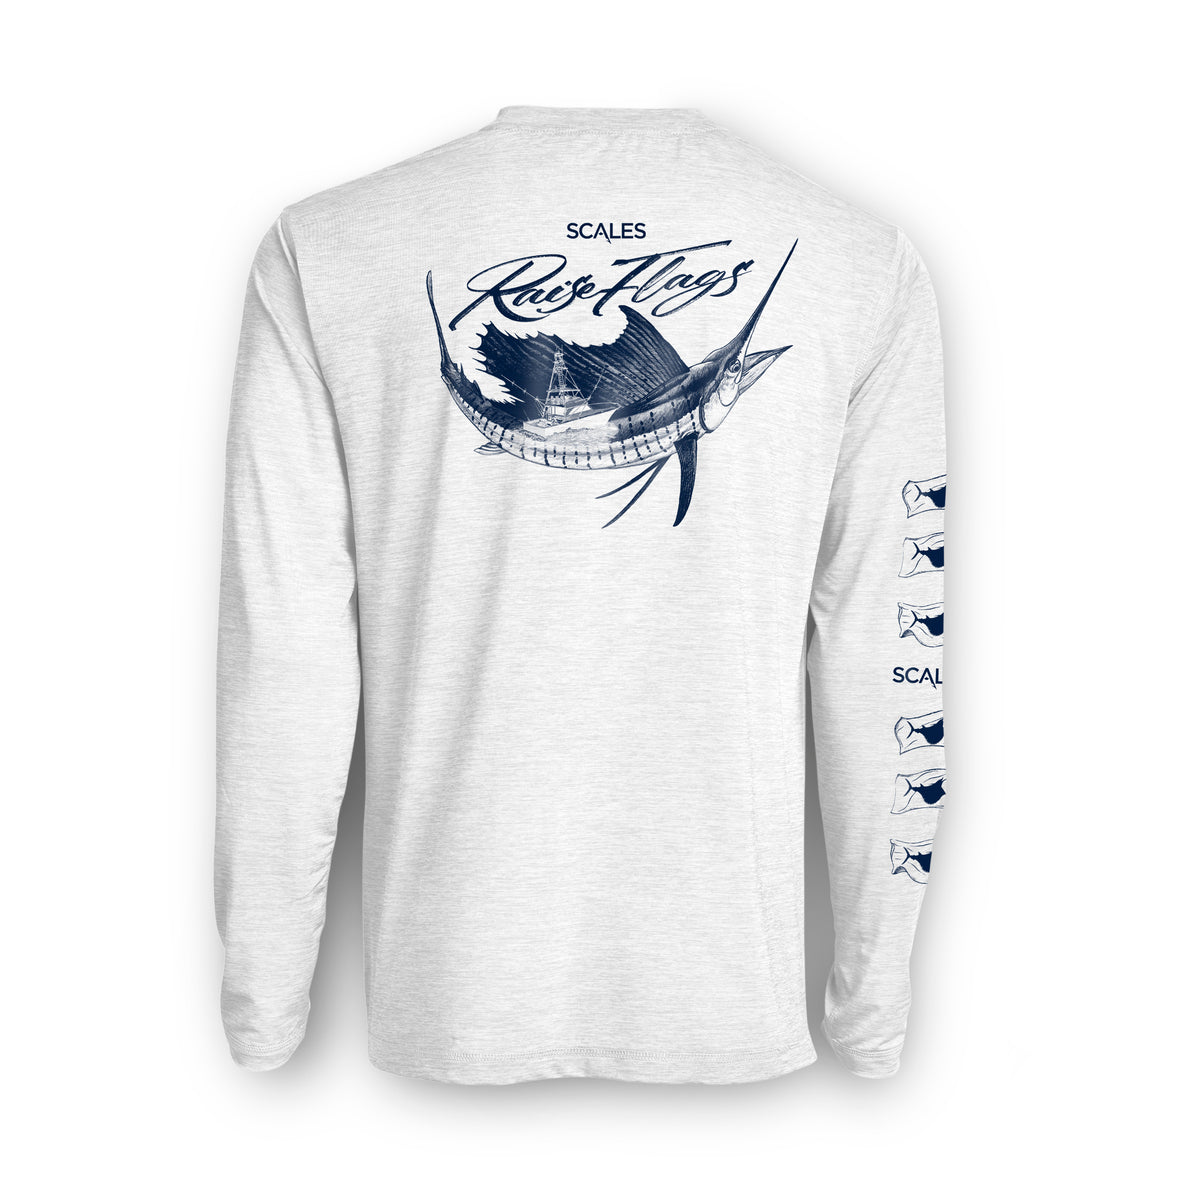 SCALES Popping Sails Active Performance Long Sleeve